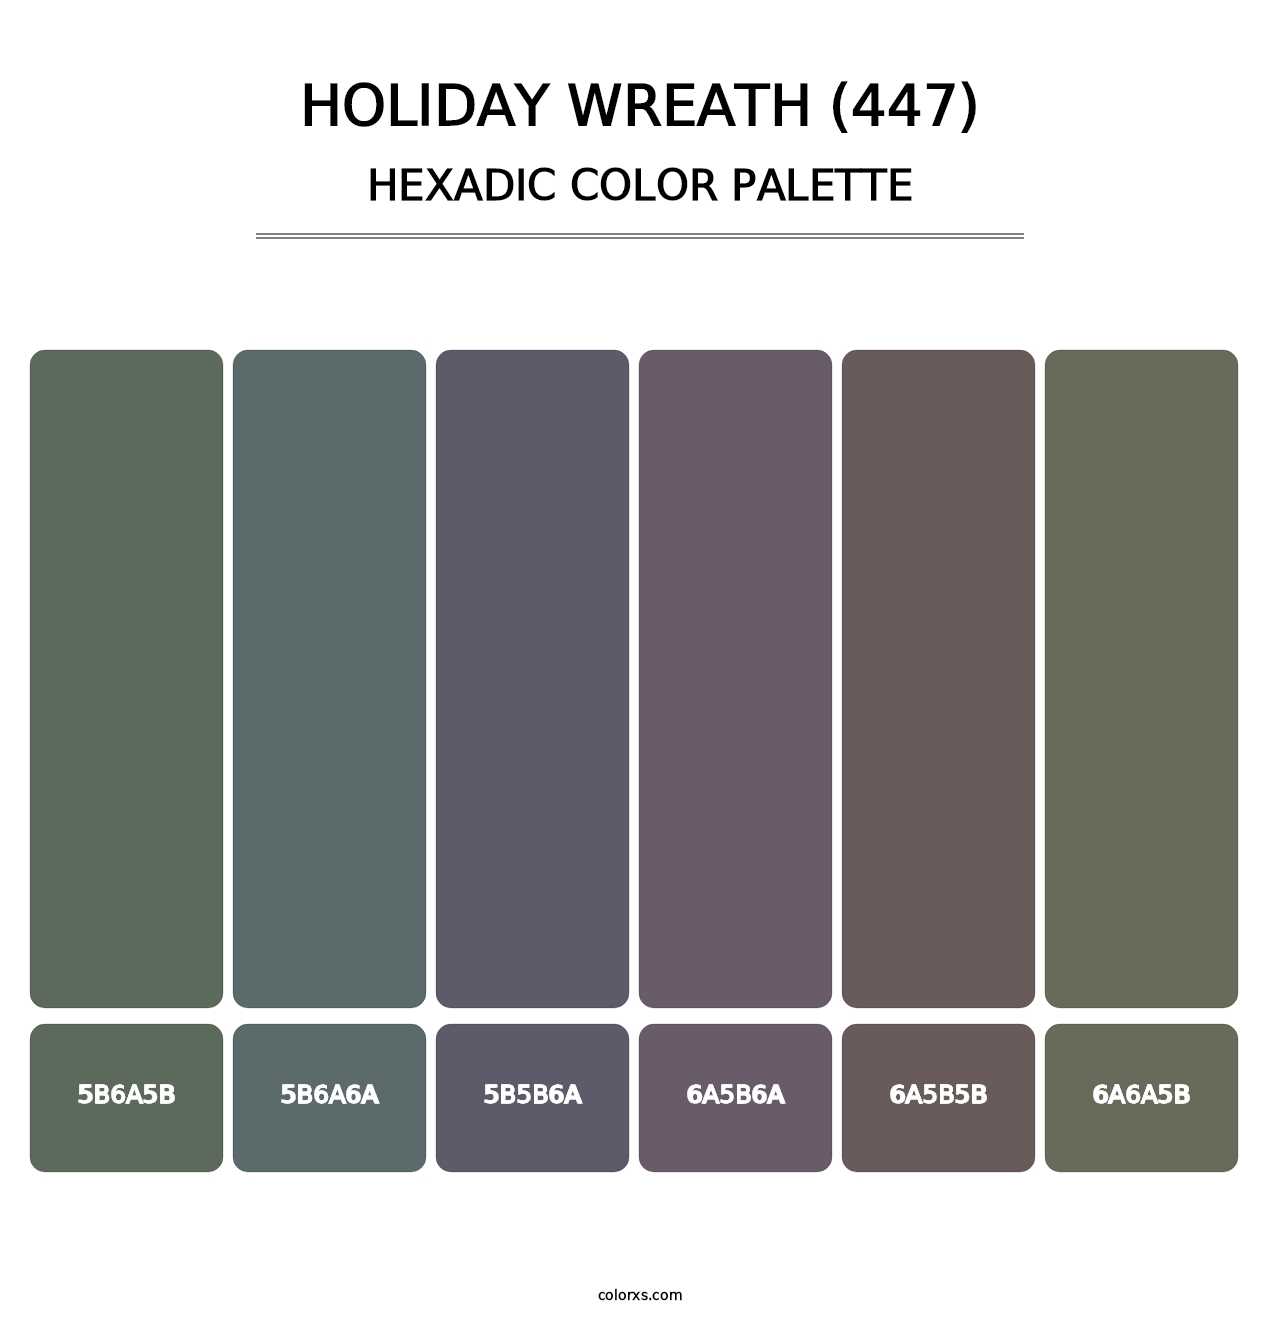 Holiday Wreath (447) - Hexadic Color Palette